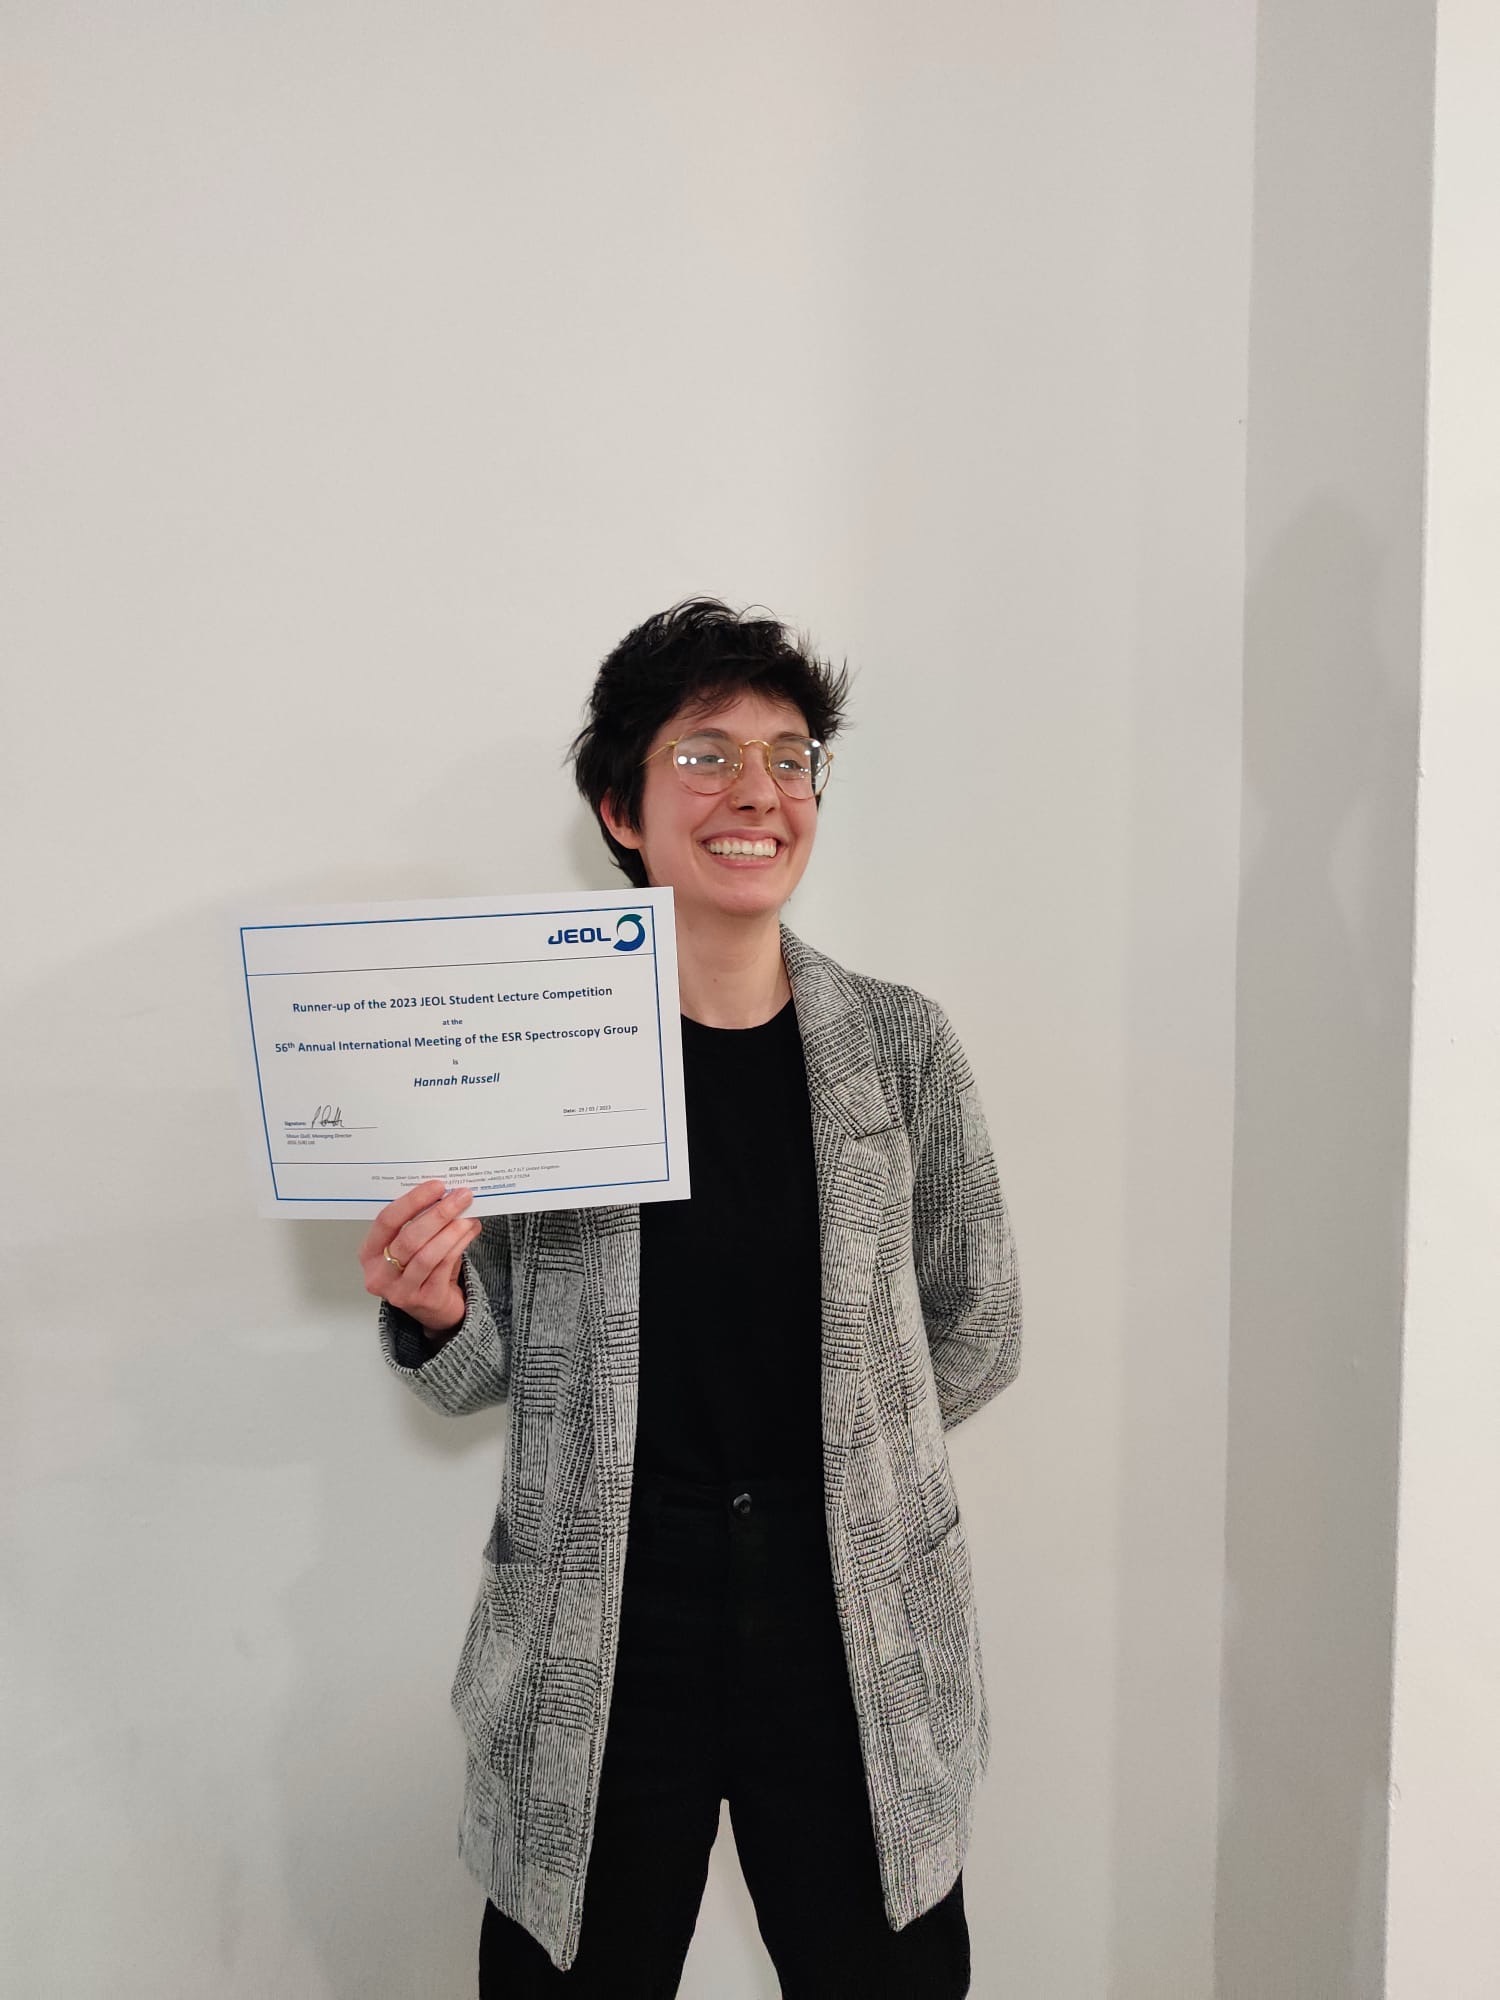 Hannah Russell smiling and holding a certificate showing that she was runner up in the Jeol student prize talks.